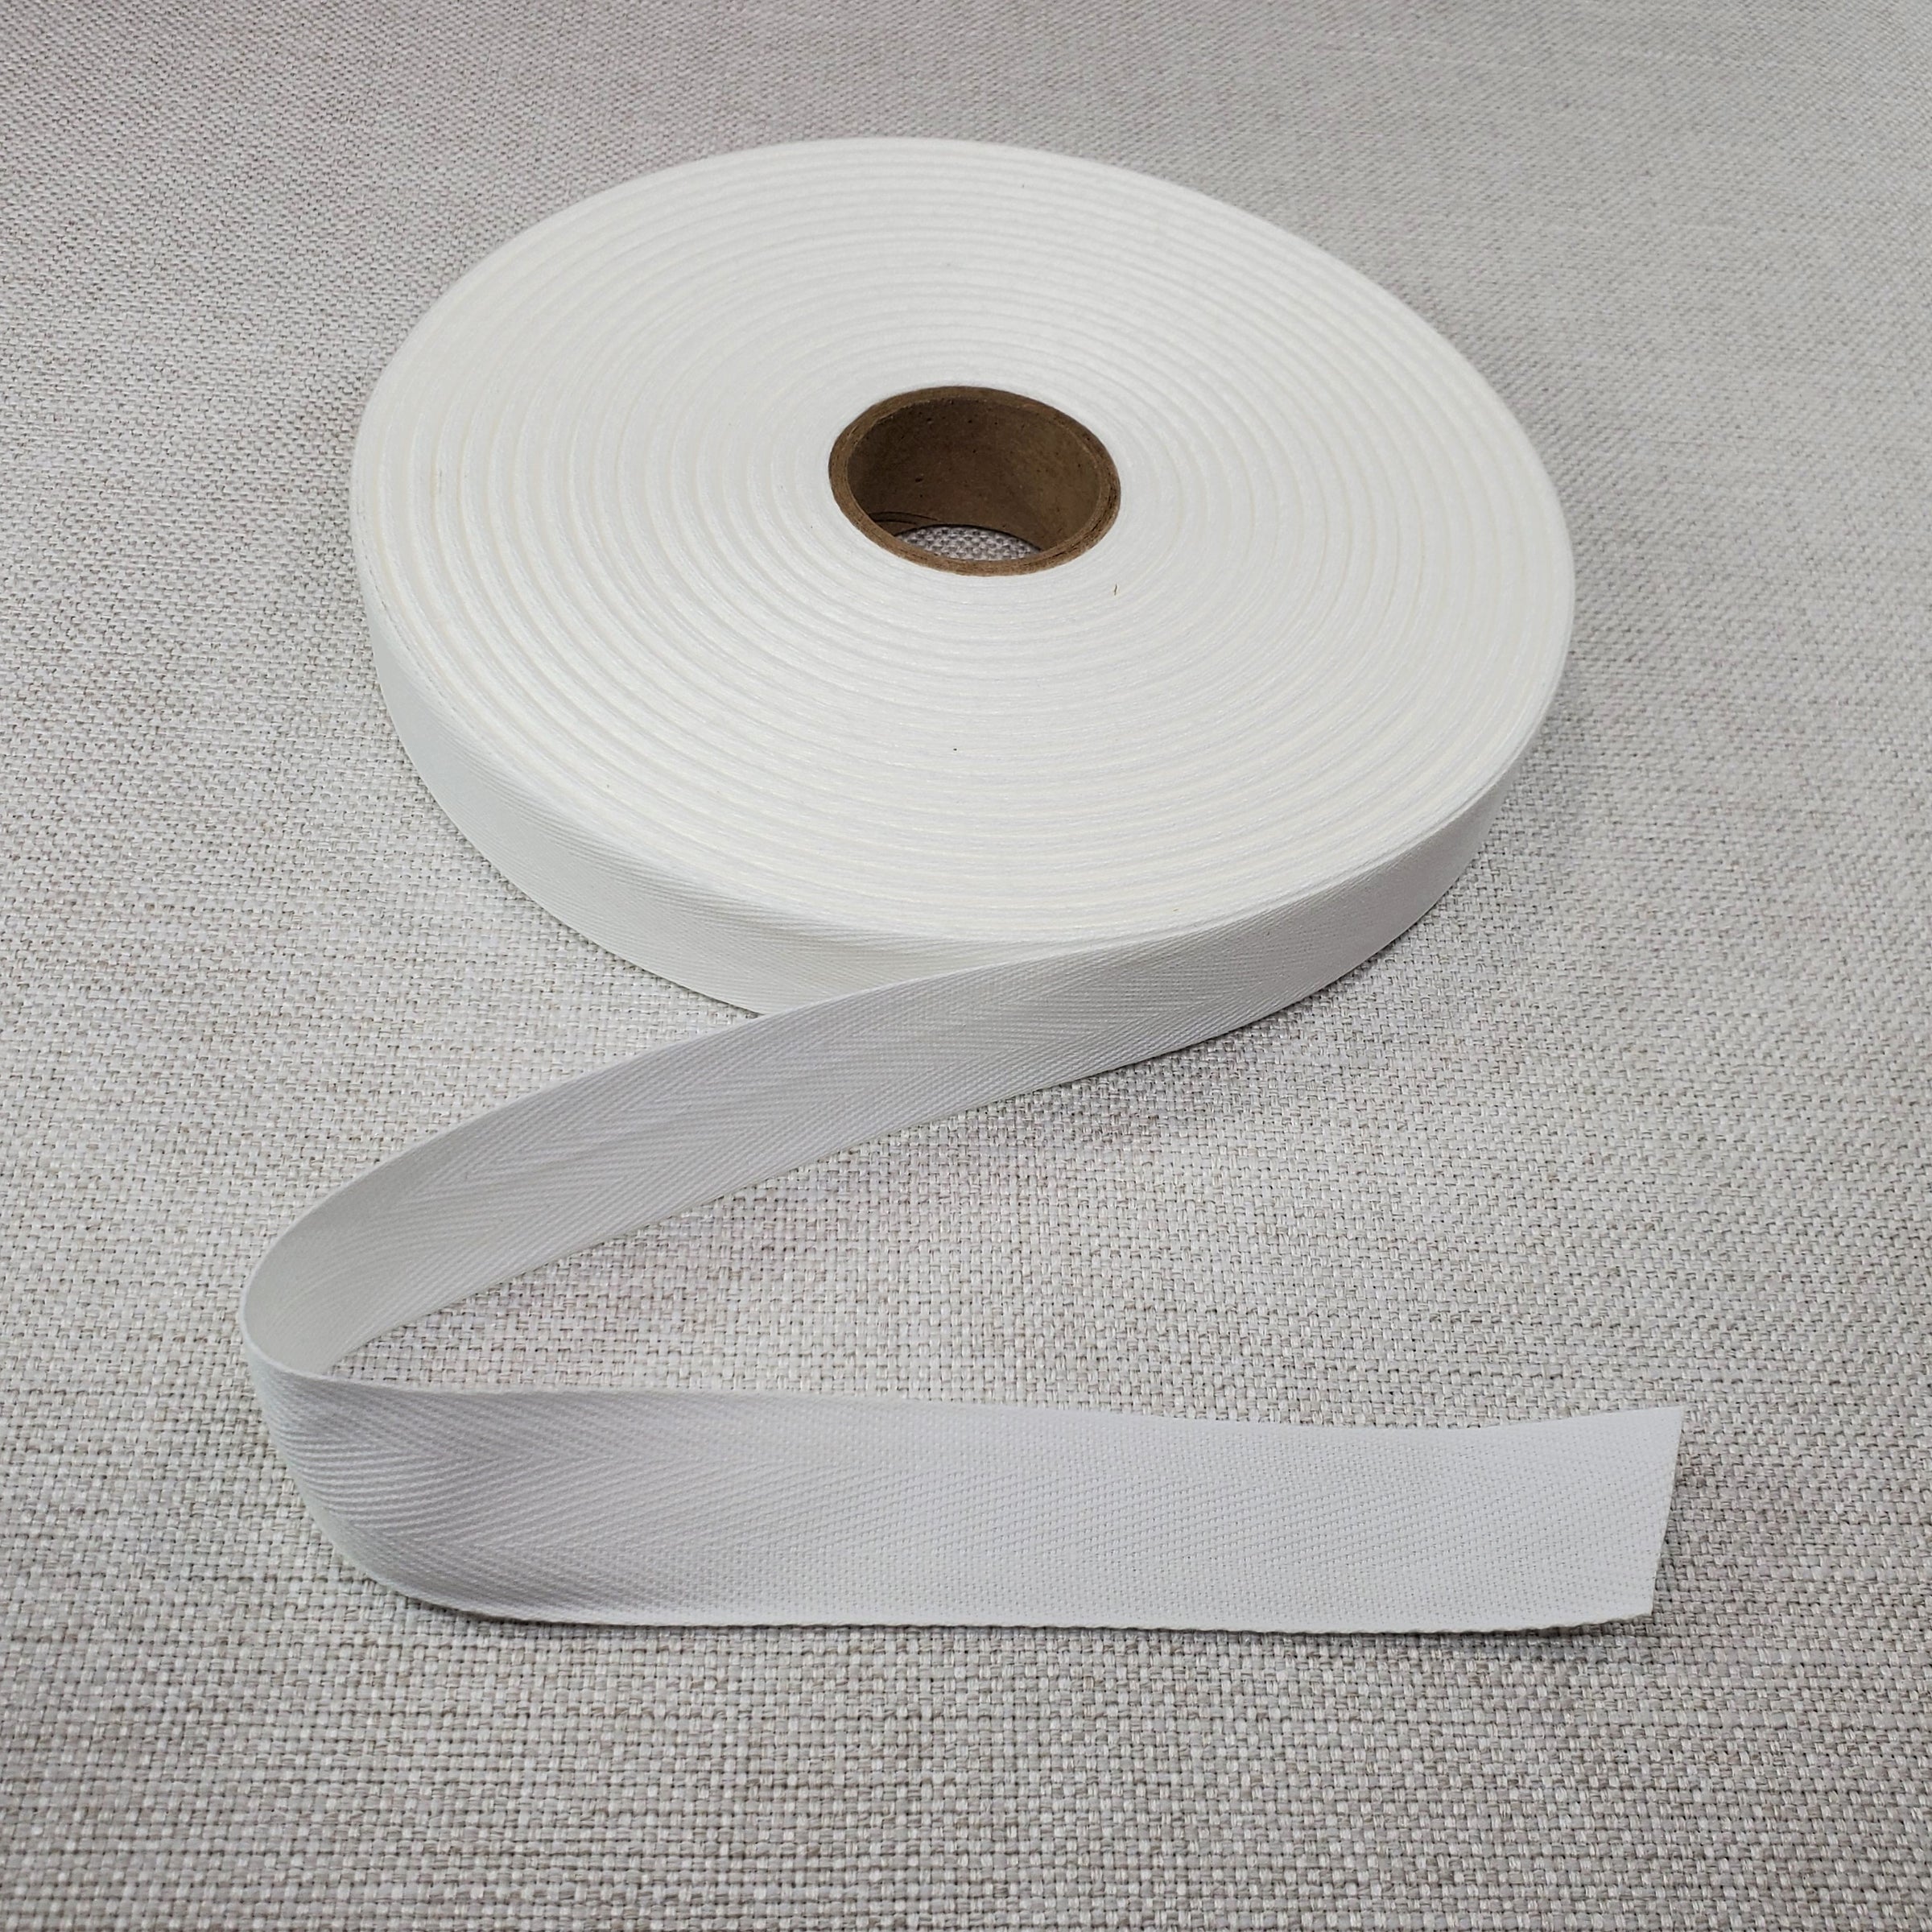 USA Made 3/8 White Cotton Twill Tape - 72 Yards - Light Weight - (Multiple Widths & Yardages Available)